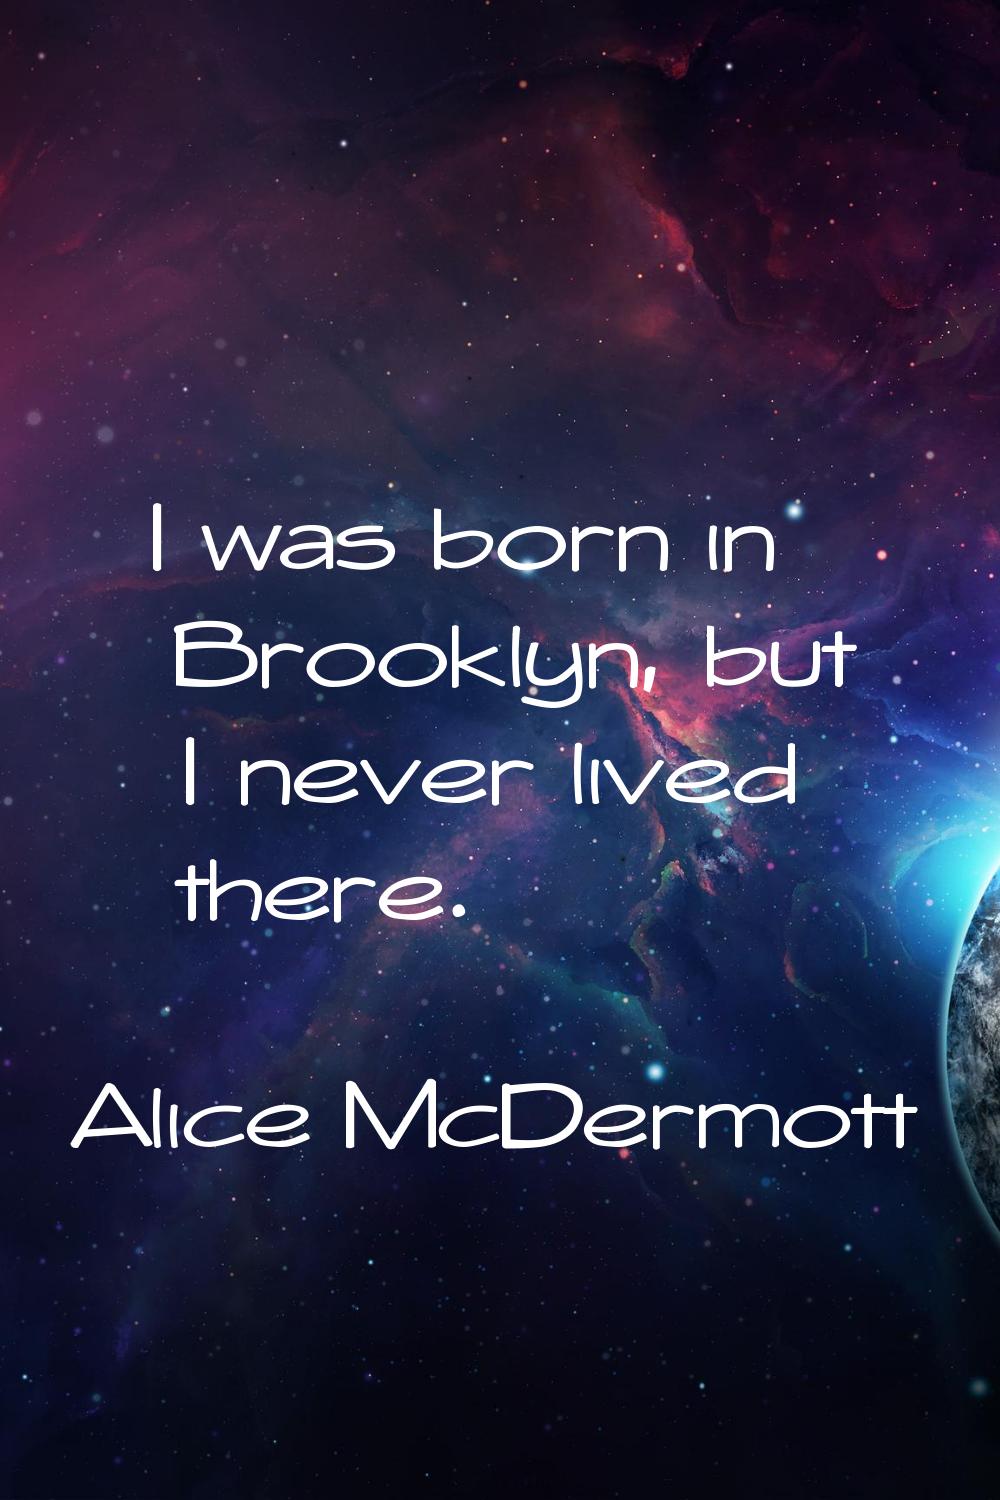 I was born in Brooklyn, but I never lived there.